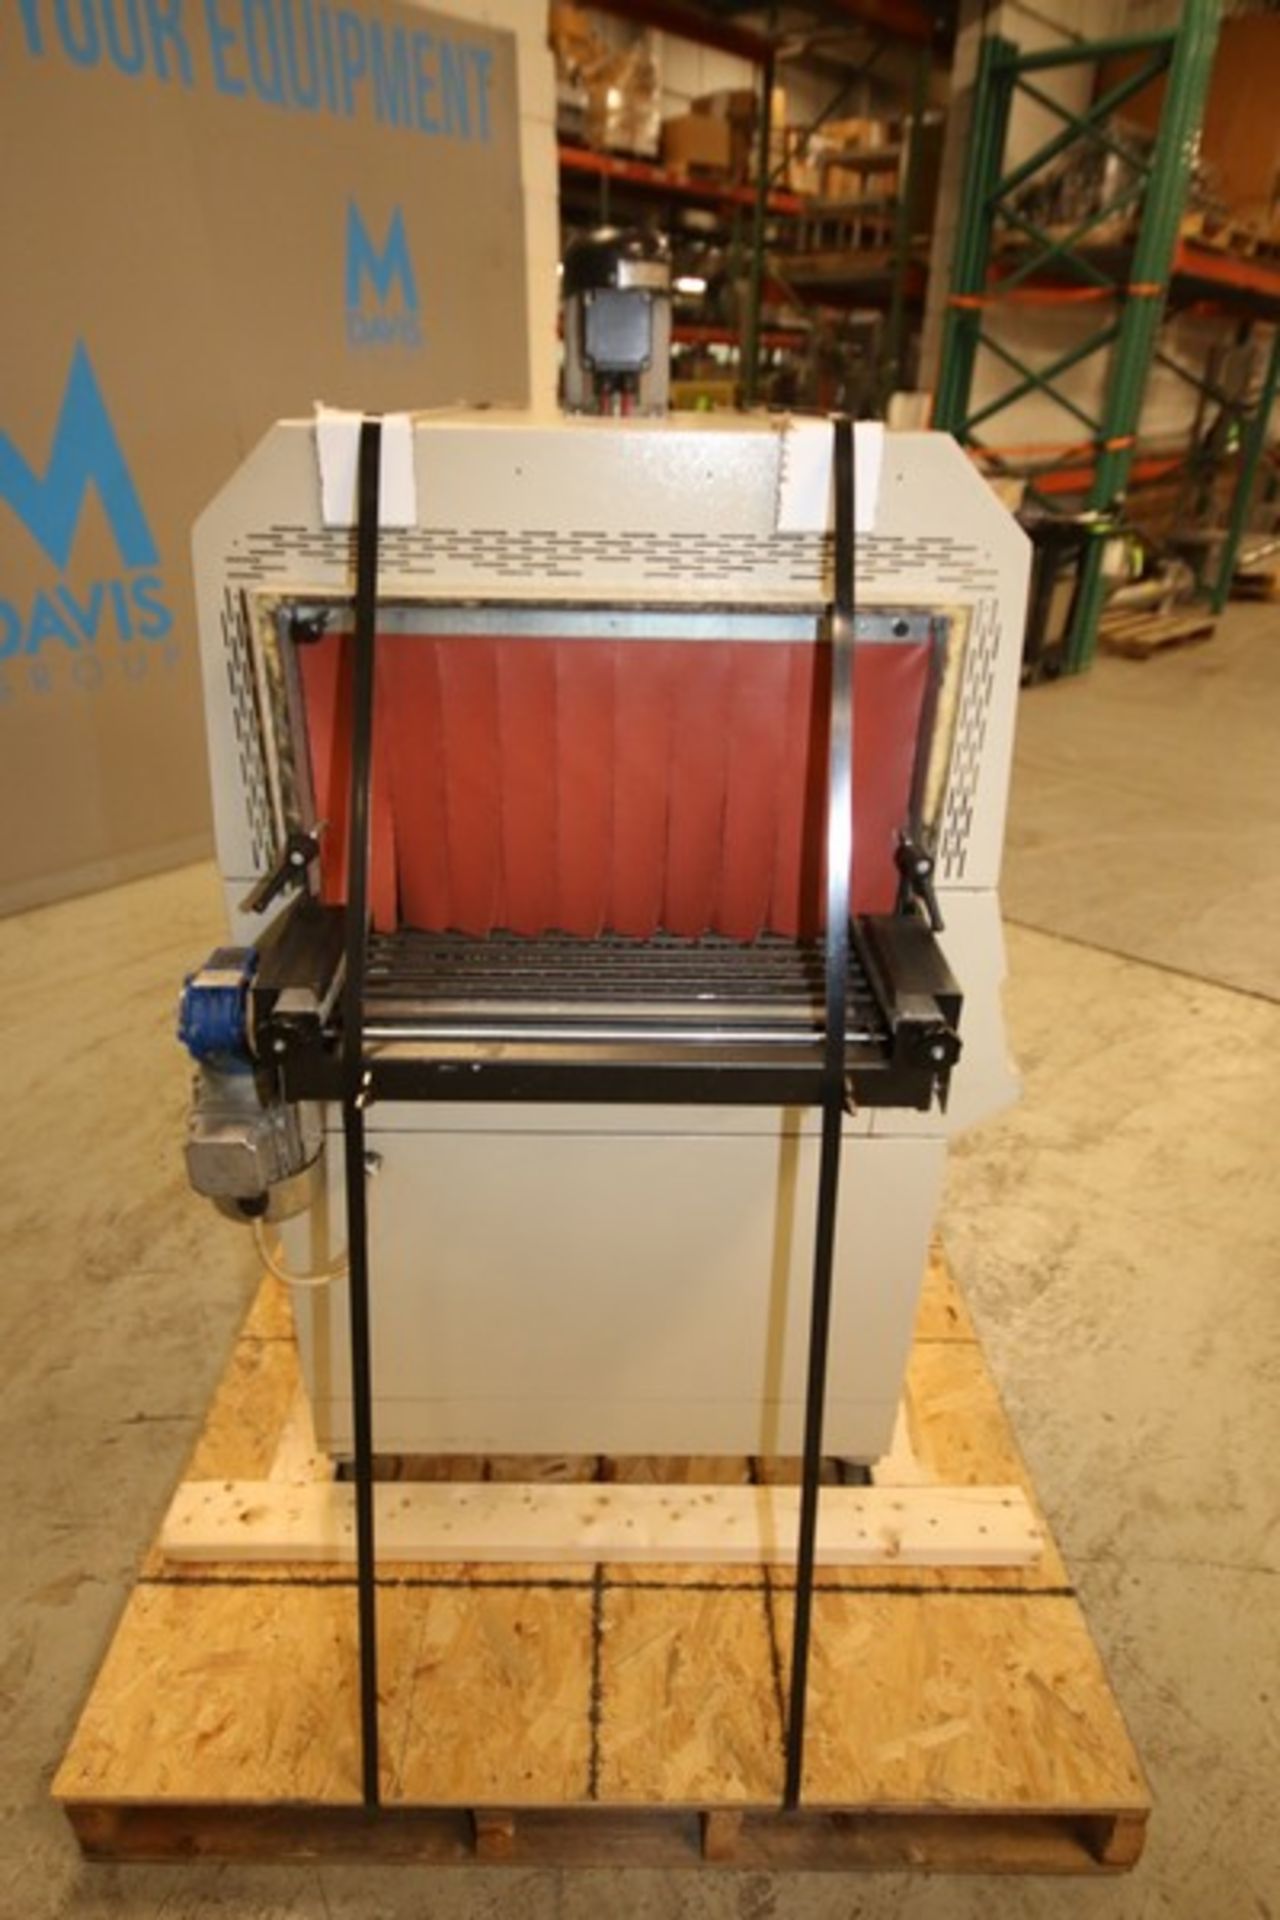 Minipack 37" L Shrink Wrap Tunnel, Model Tunnel 50 DG, SN 003291, with 17.5" W x 9.5" H Product - Image 5 of 9